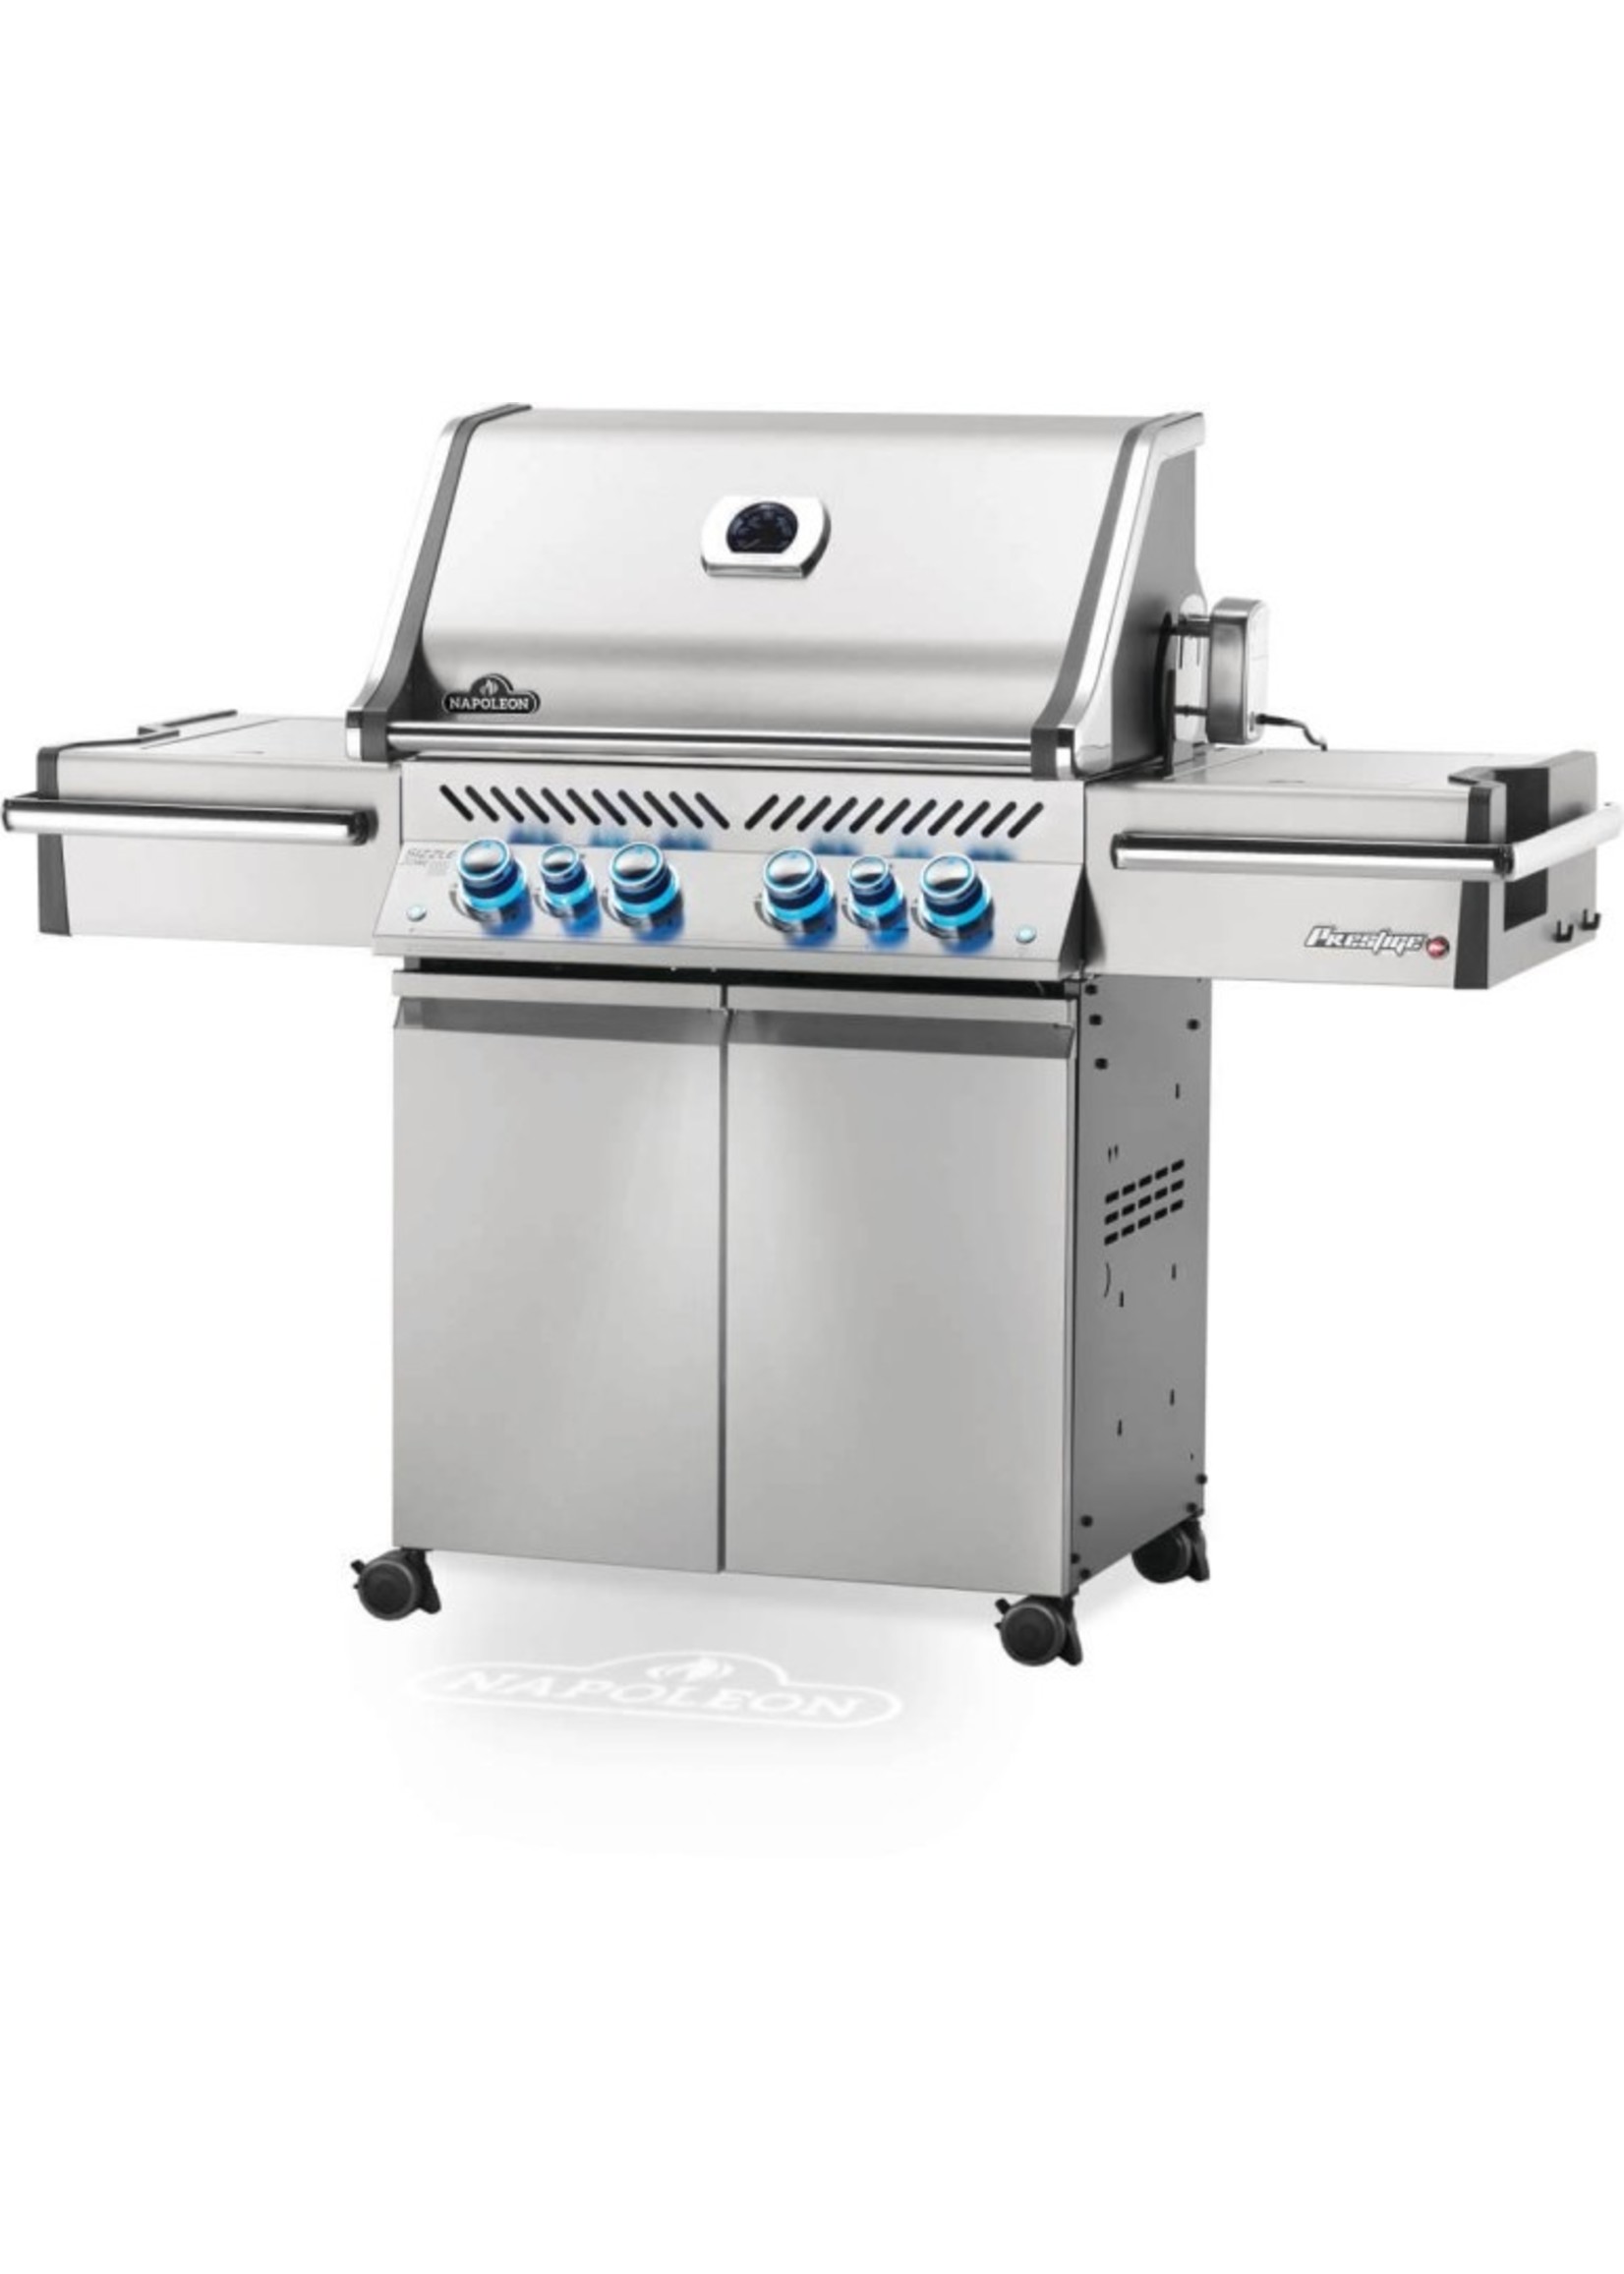 Napoleon PRESTIGE PRO™ 500 PROPANE GAS GRILL WITH INFRARED REAR AND SIDE BURNERS, STAINLESS STEEL